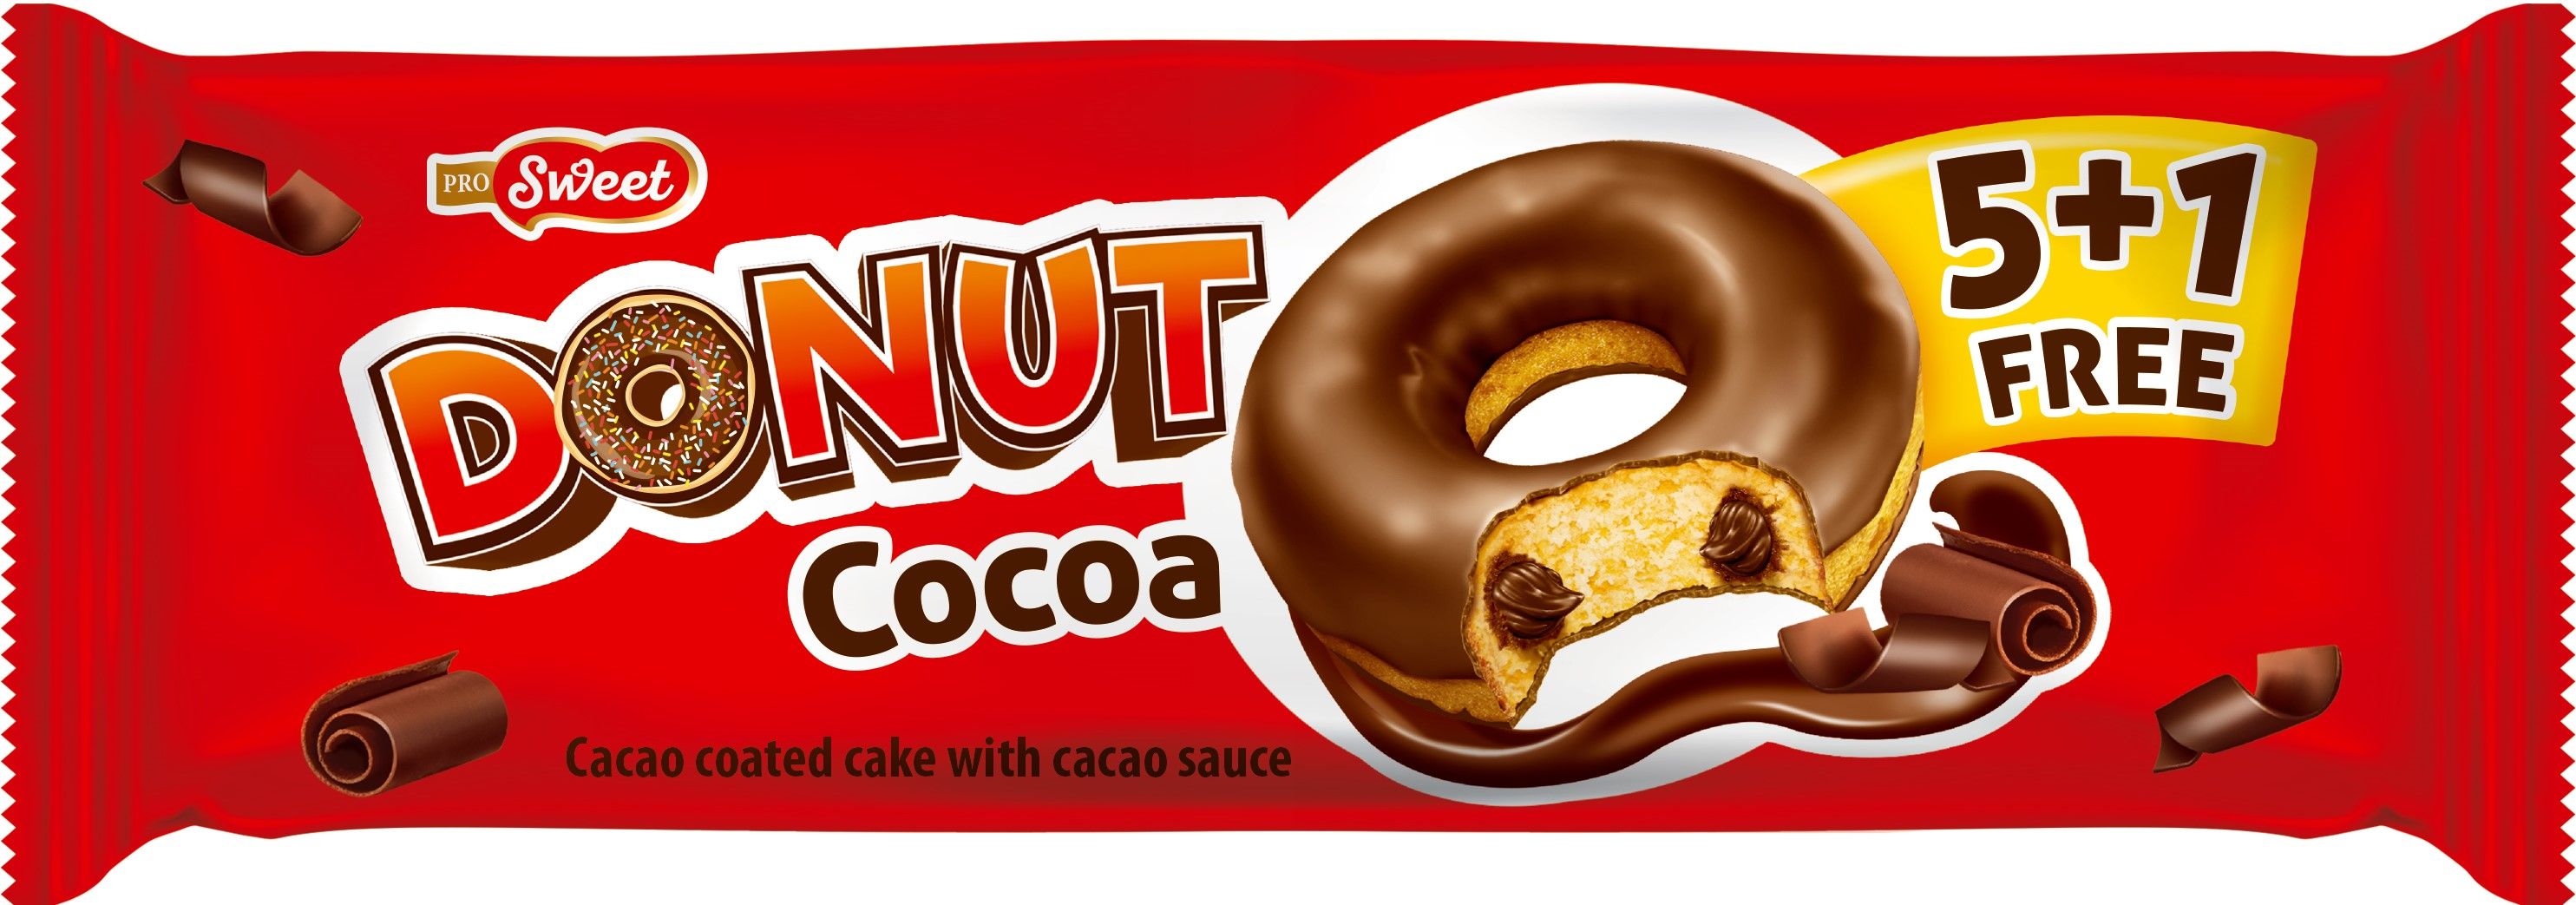 PROSweet DONUT COCOA MULTIPACK